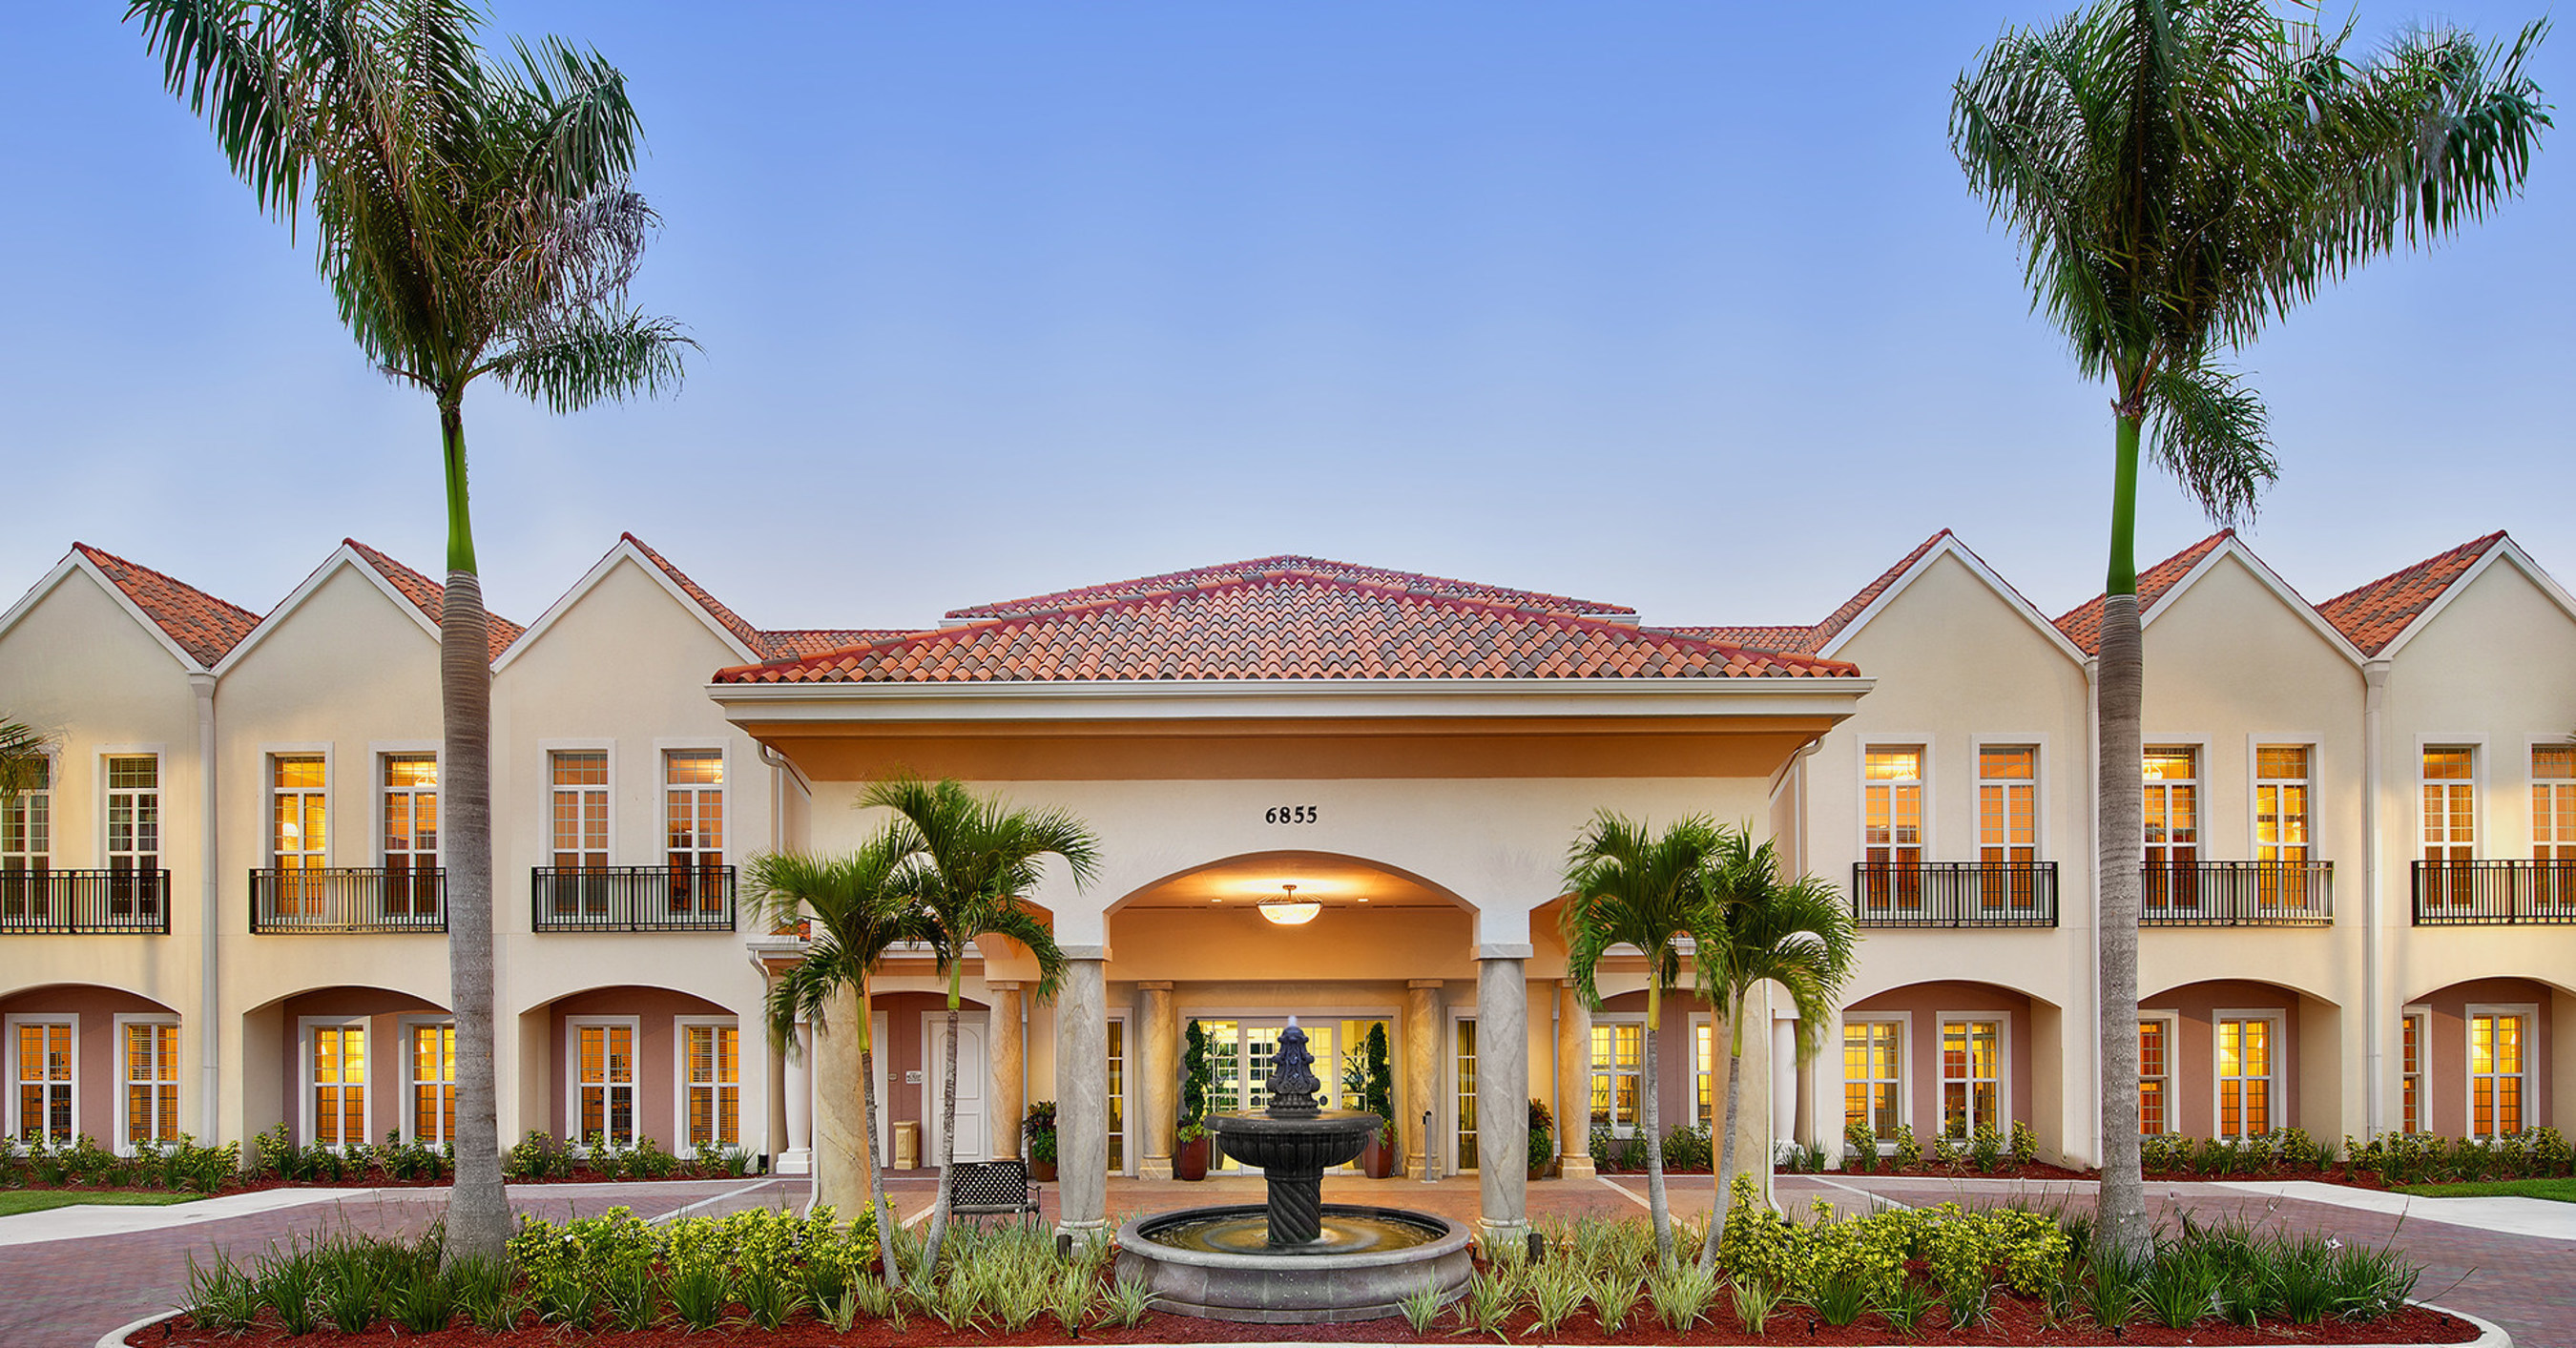 Villa at Terracina Grand, A First of its Kind Experiential Memory Care Community Developed by The Goodman Group